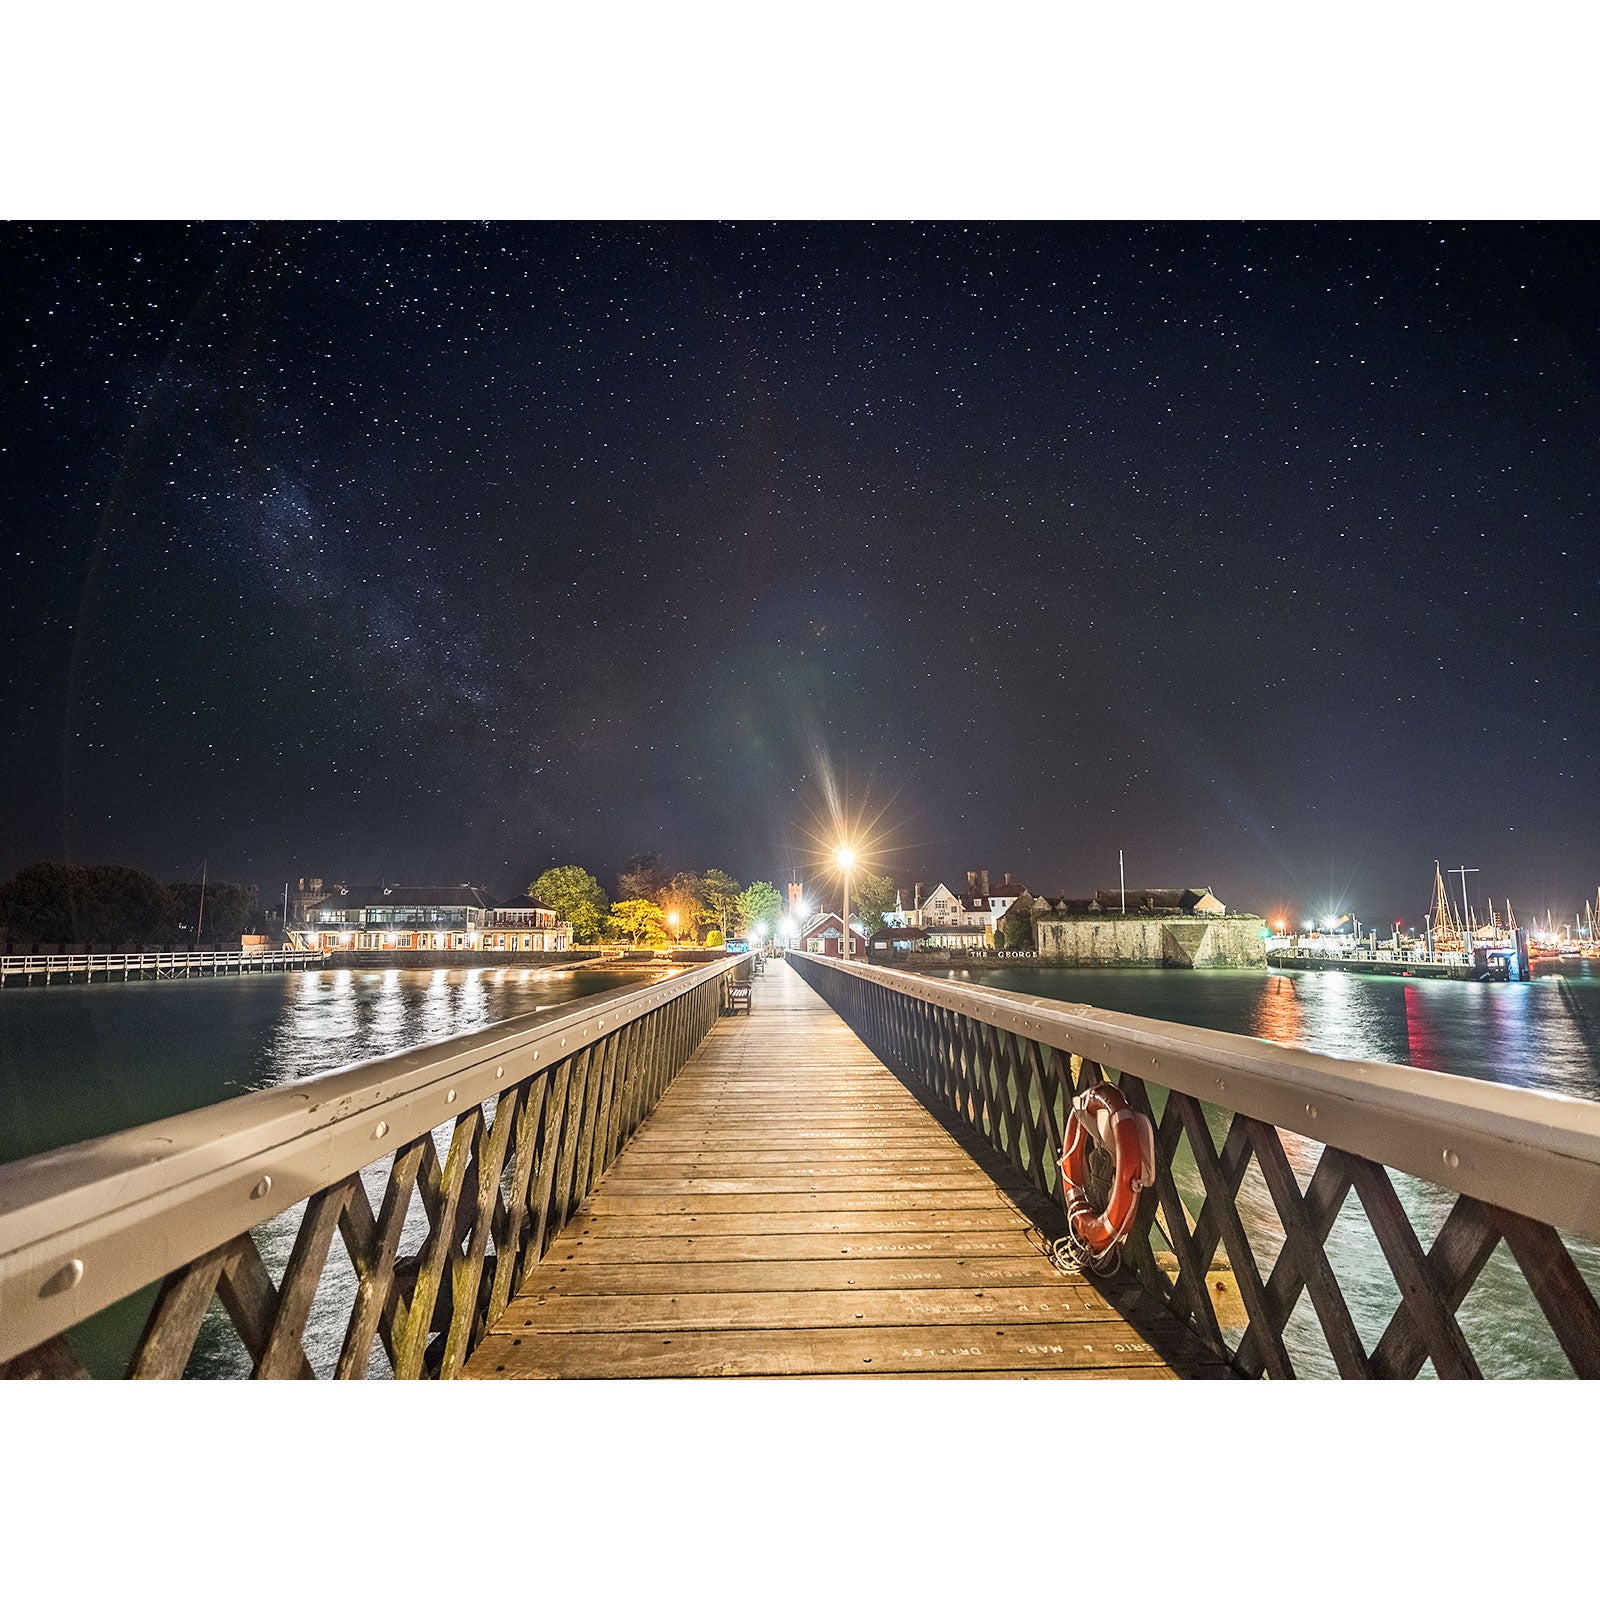 Milky Way, Yarmouth Pier - Available Light Photography